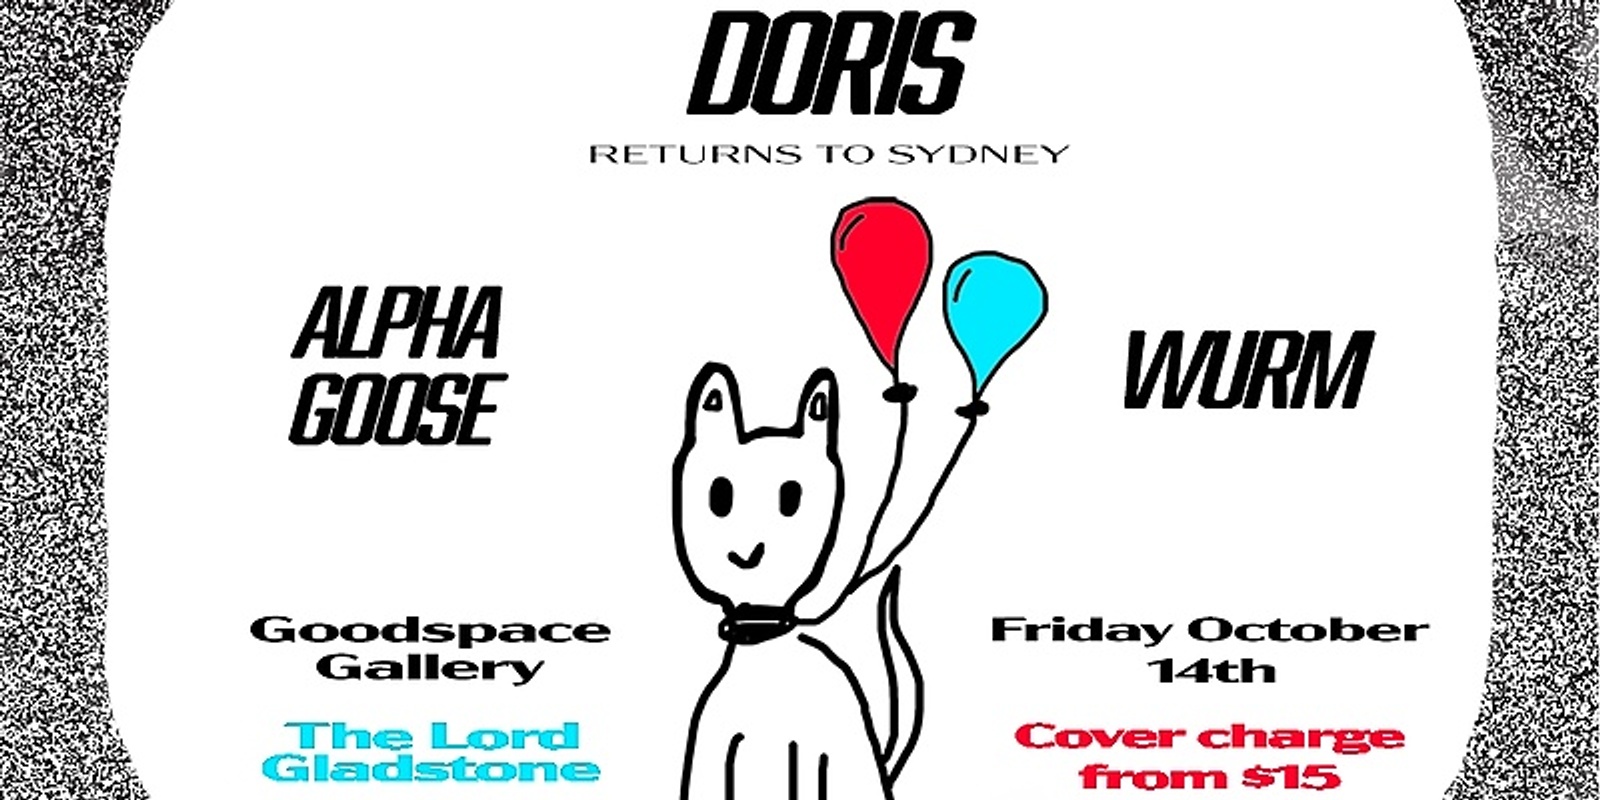 Banner image for Band Night 5 @ Goodspace Gallery ft. Doris, wurm, Alpha Goose, Covert Attention